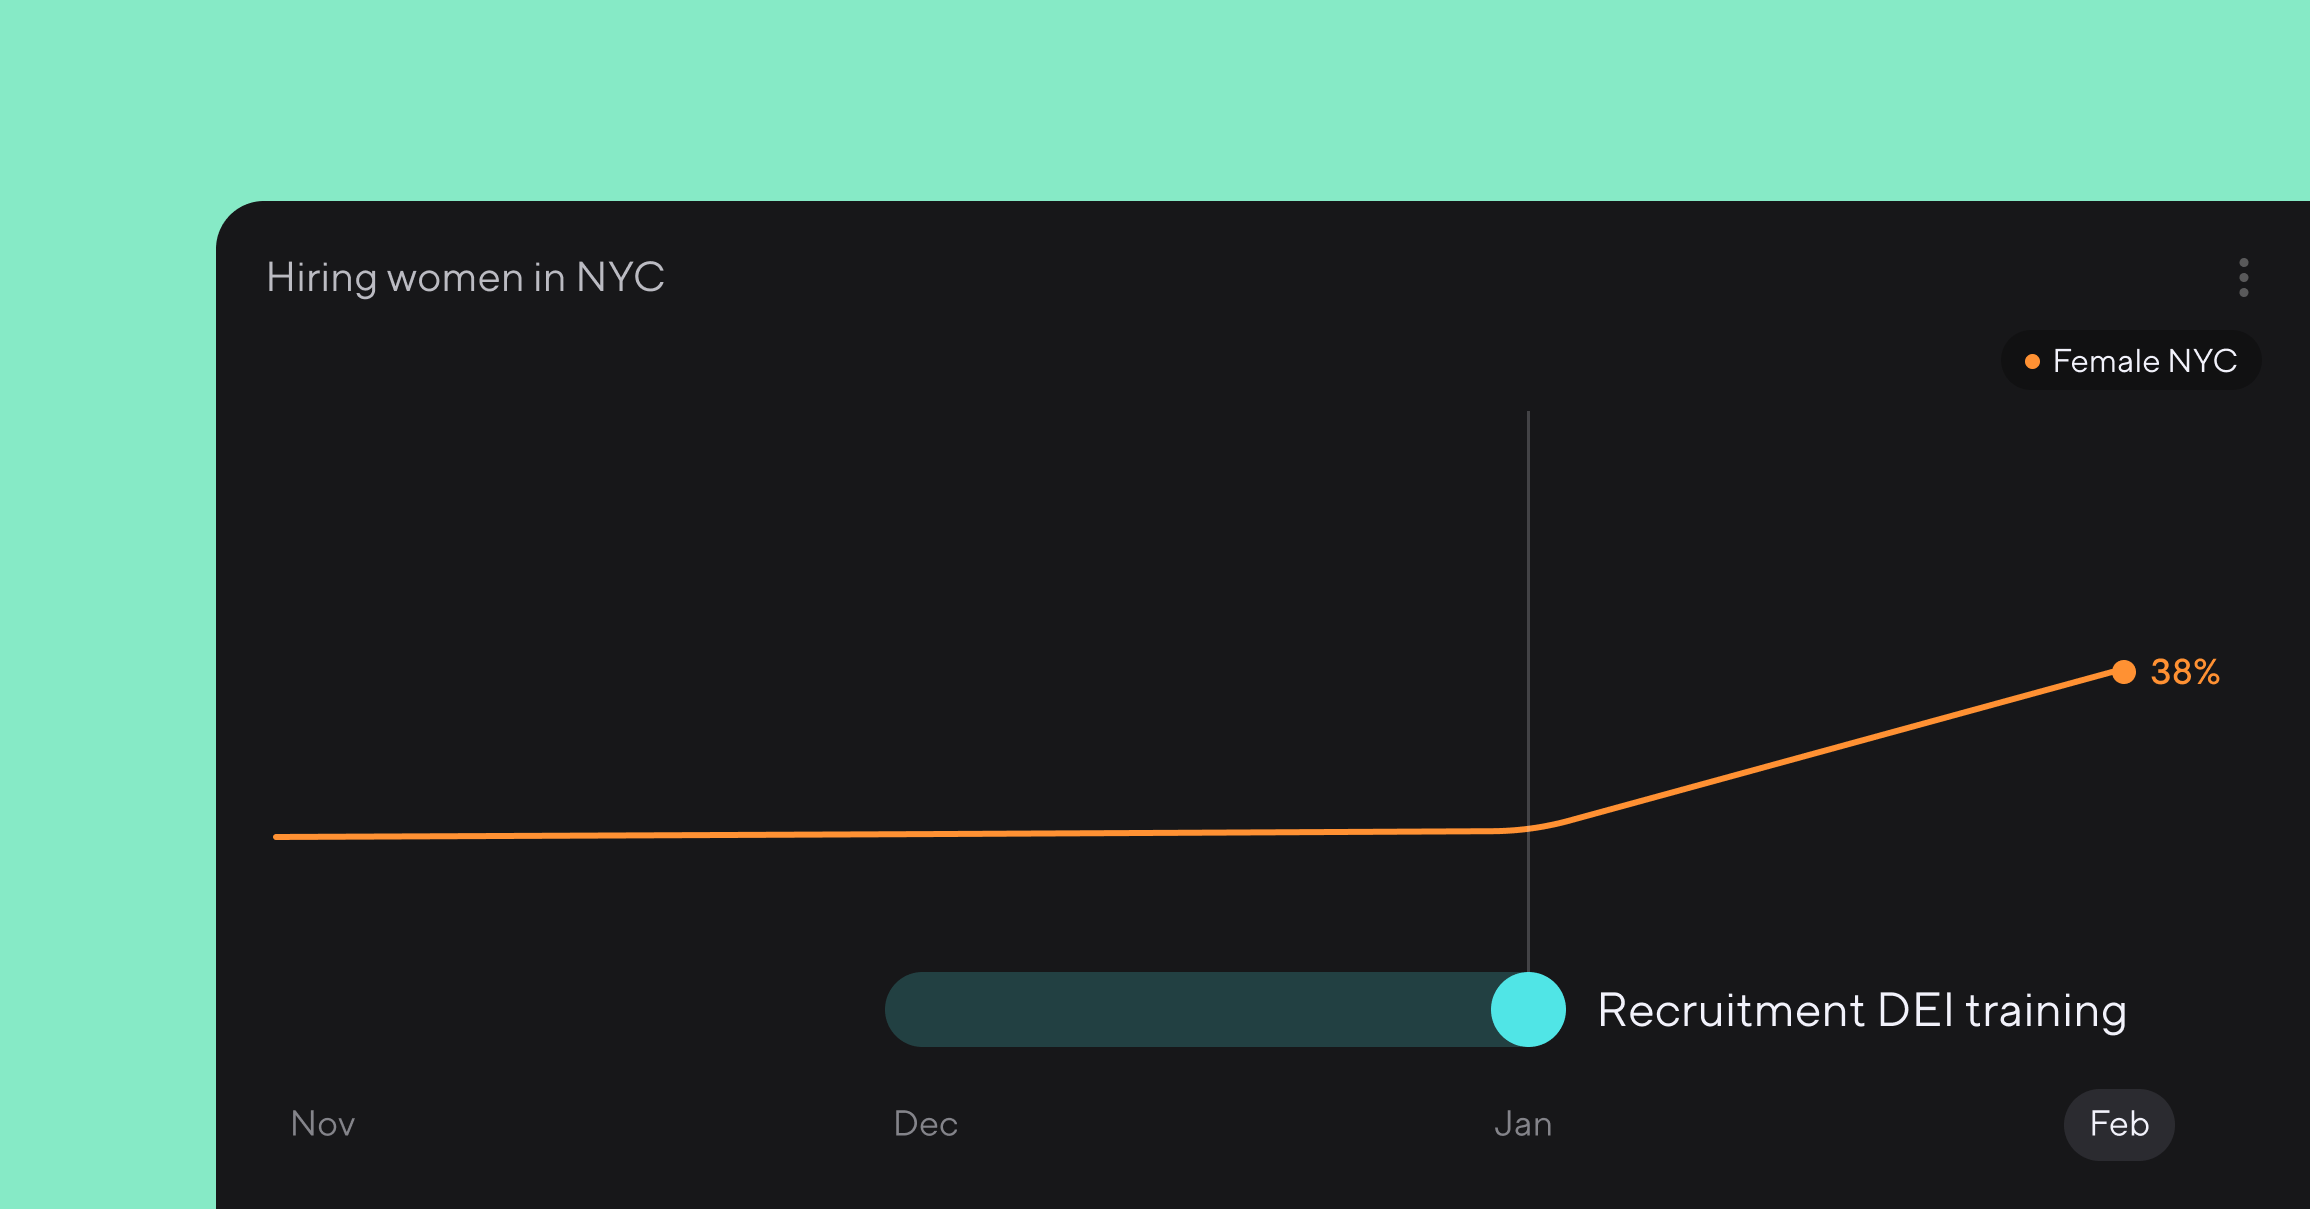 Line graph titled Hiring women in NYC. The chart spans November to February, with December to January labeled Recruitment DEI training. The graph trends upward in January and is at 38% in February.